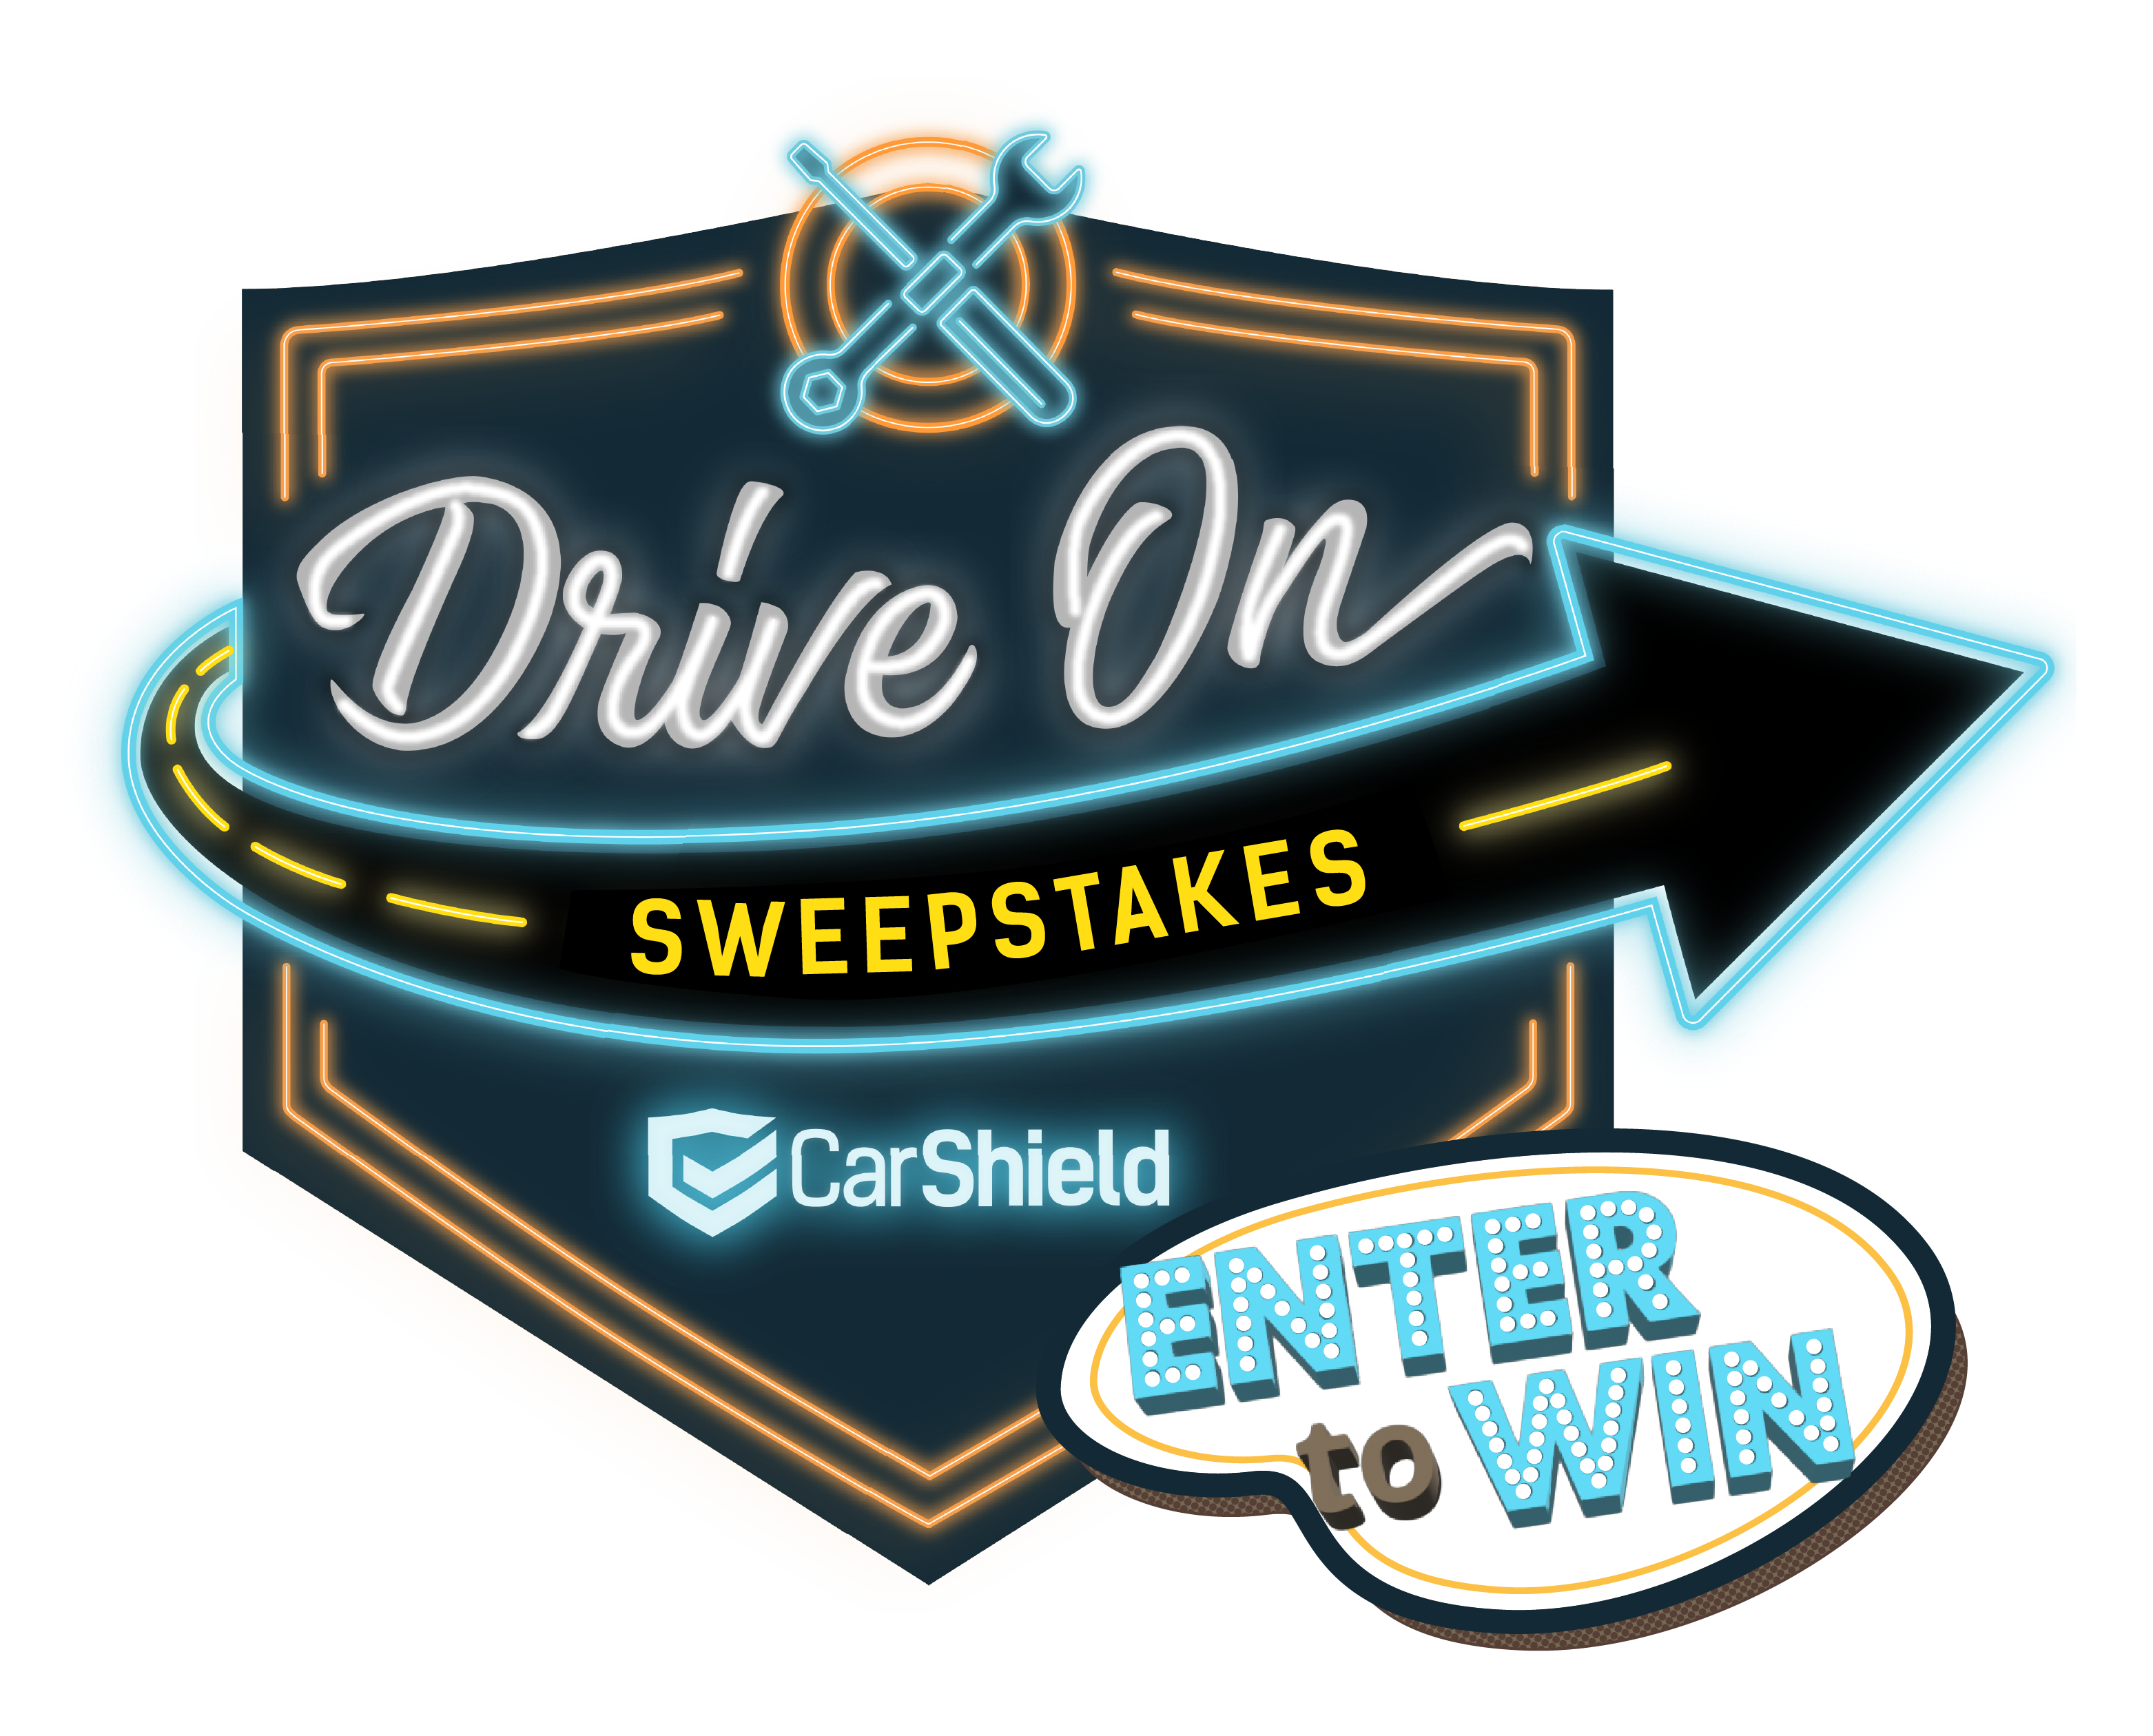 CarShield TV Sweepstakes